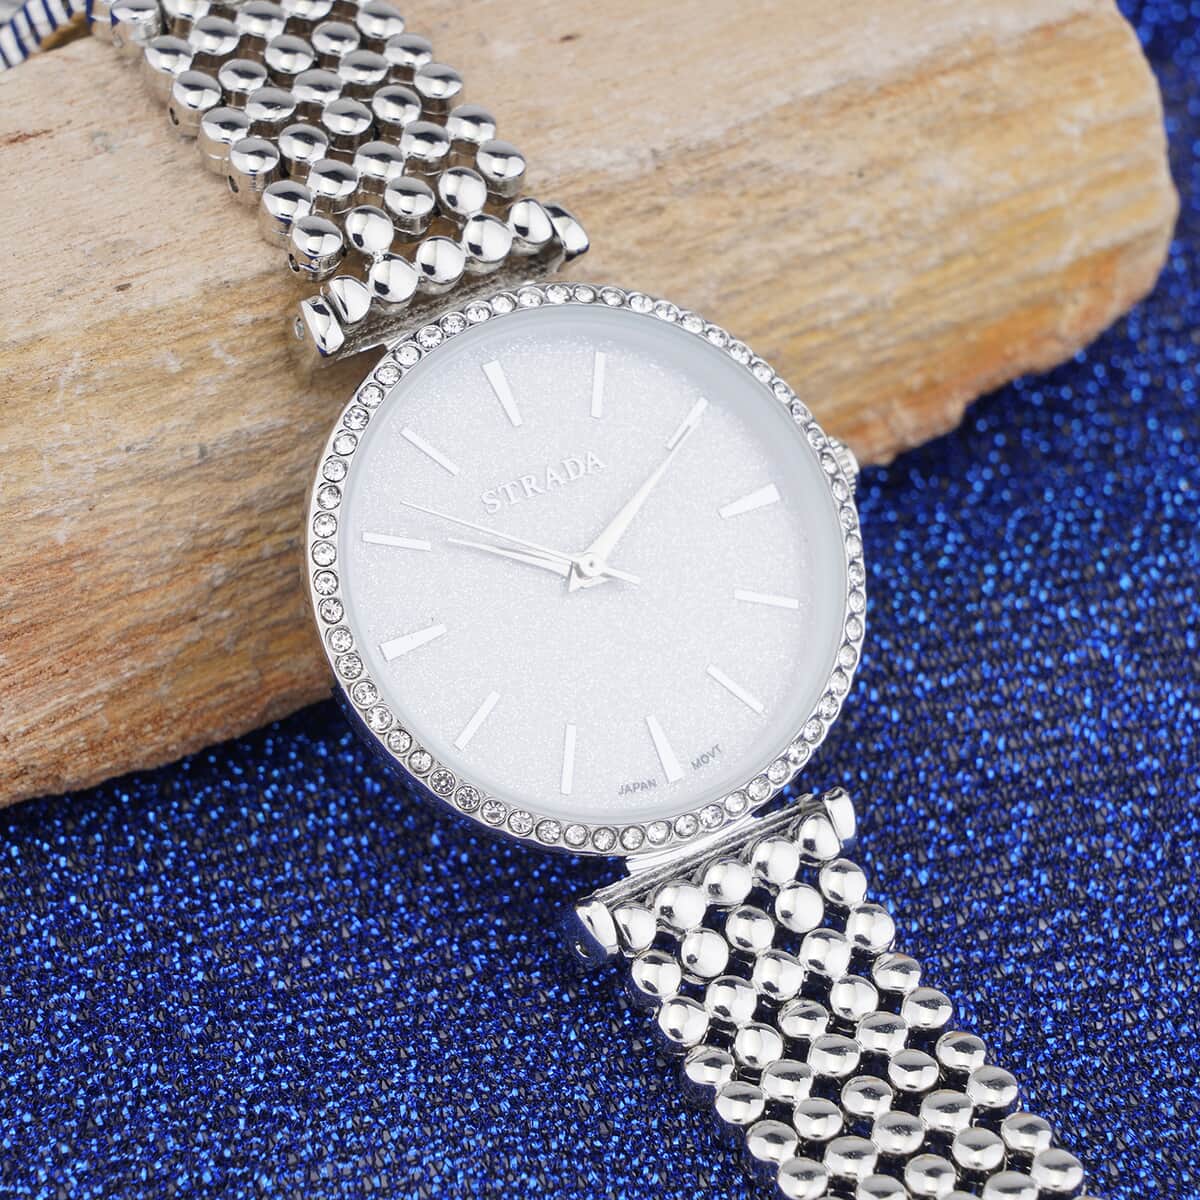 Strada White Austrian Crystal Japanese Movement Watch in Silvertone with Beaded Textured Strap image number 1